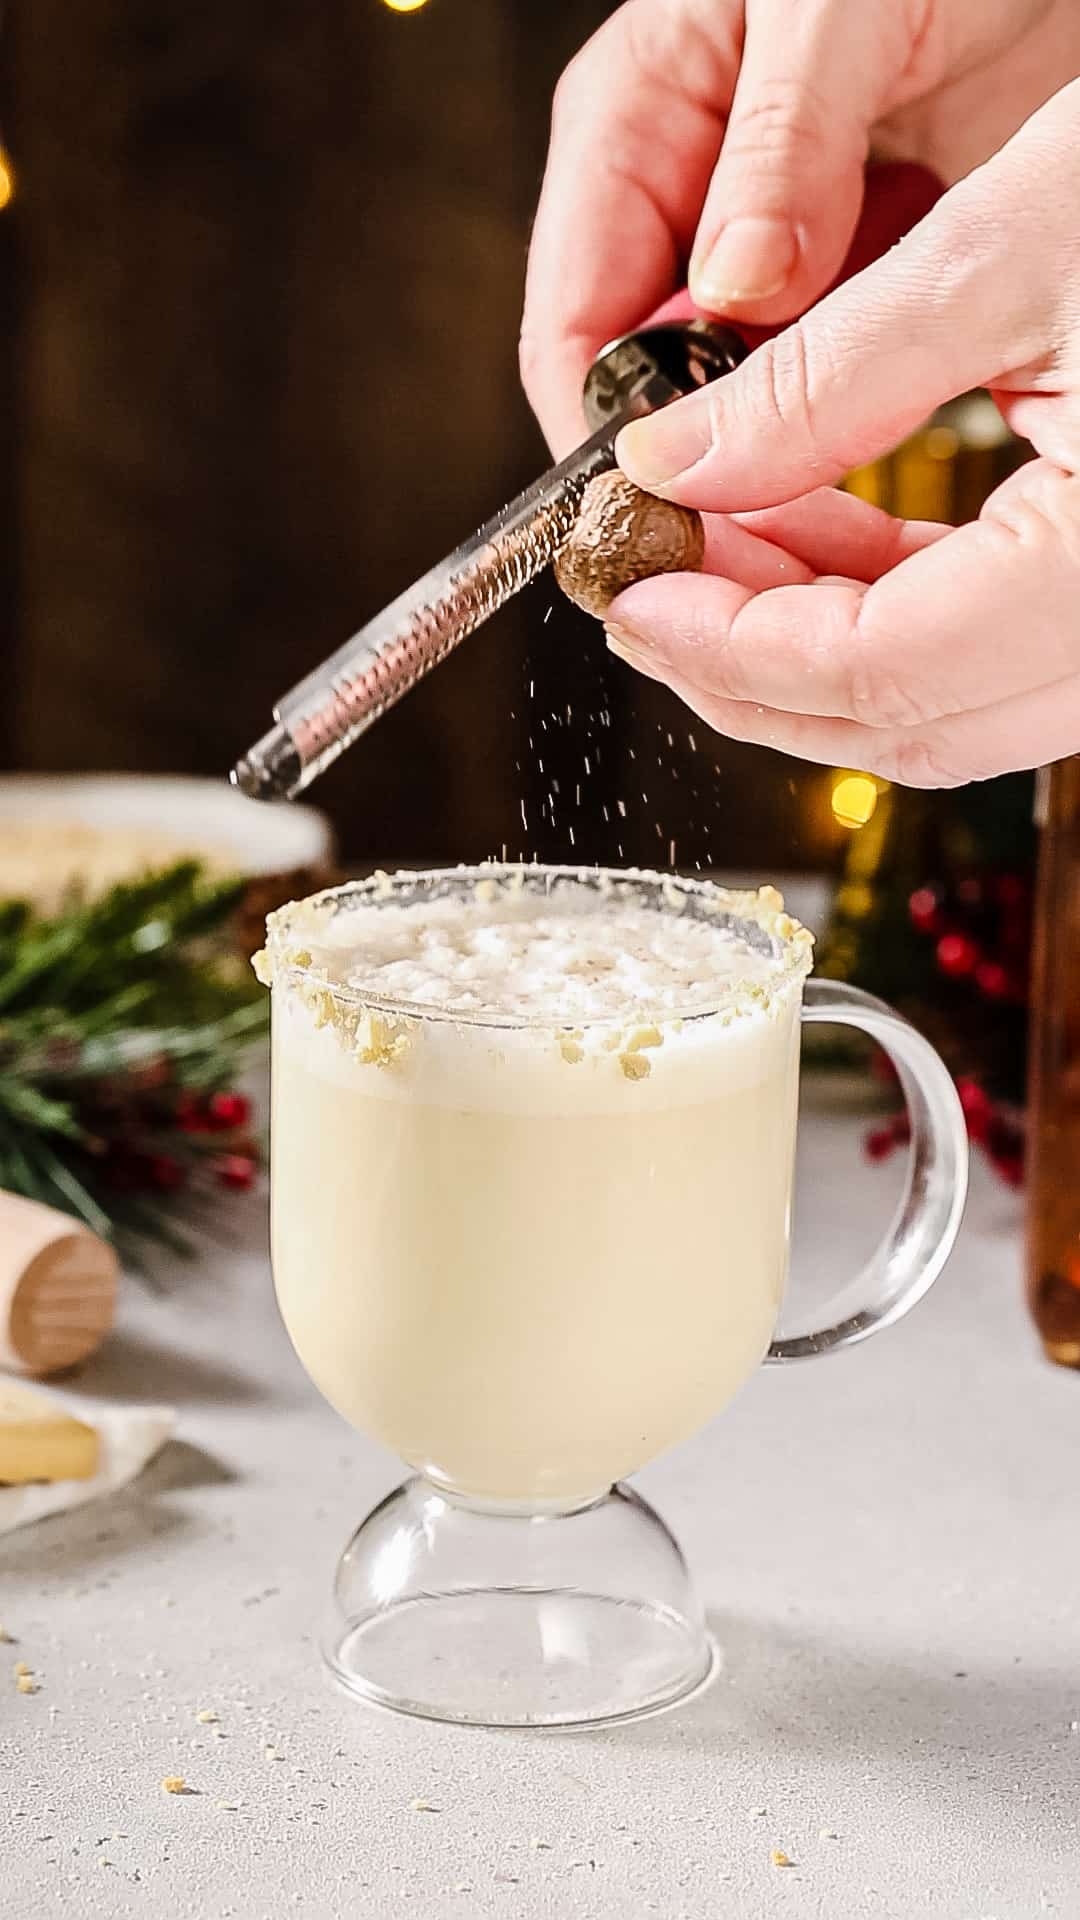 Hands using a spice grater to grate fresh nutmeg over top of a mug of eggnog.